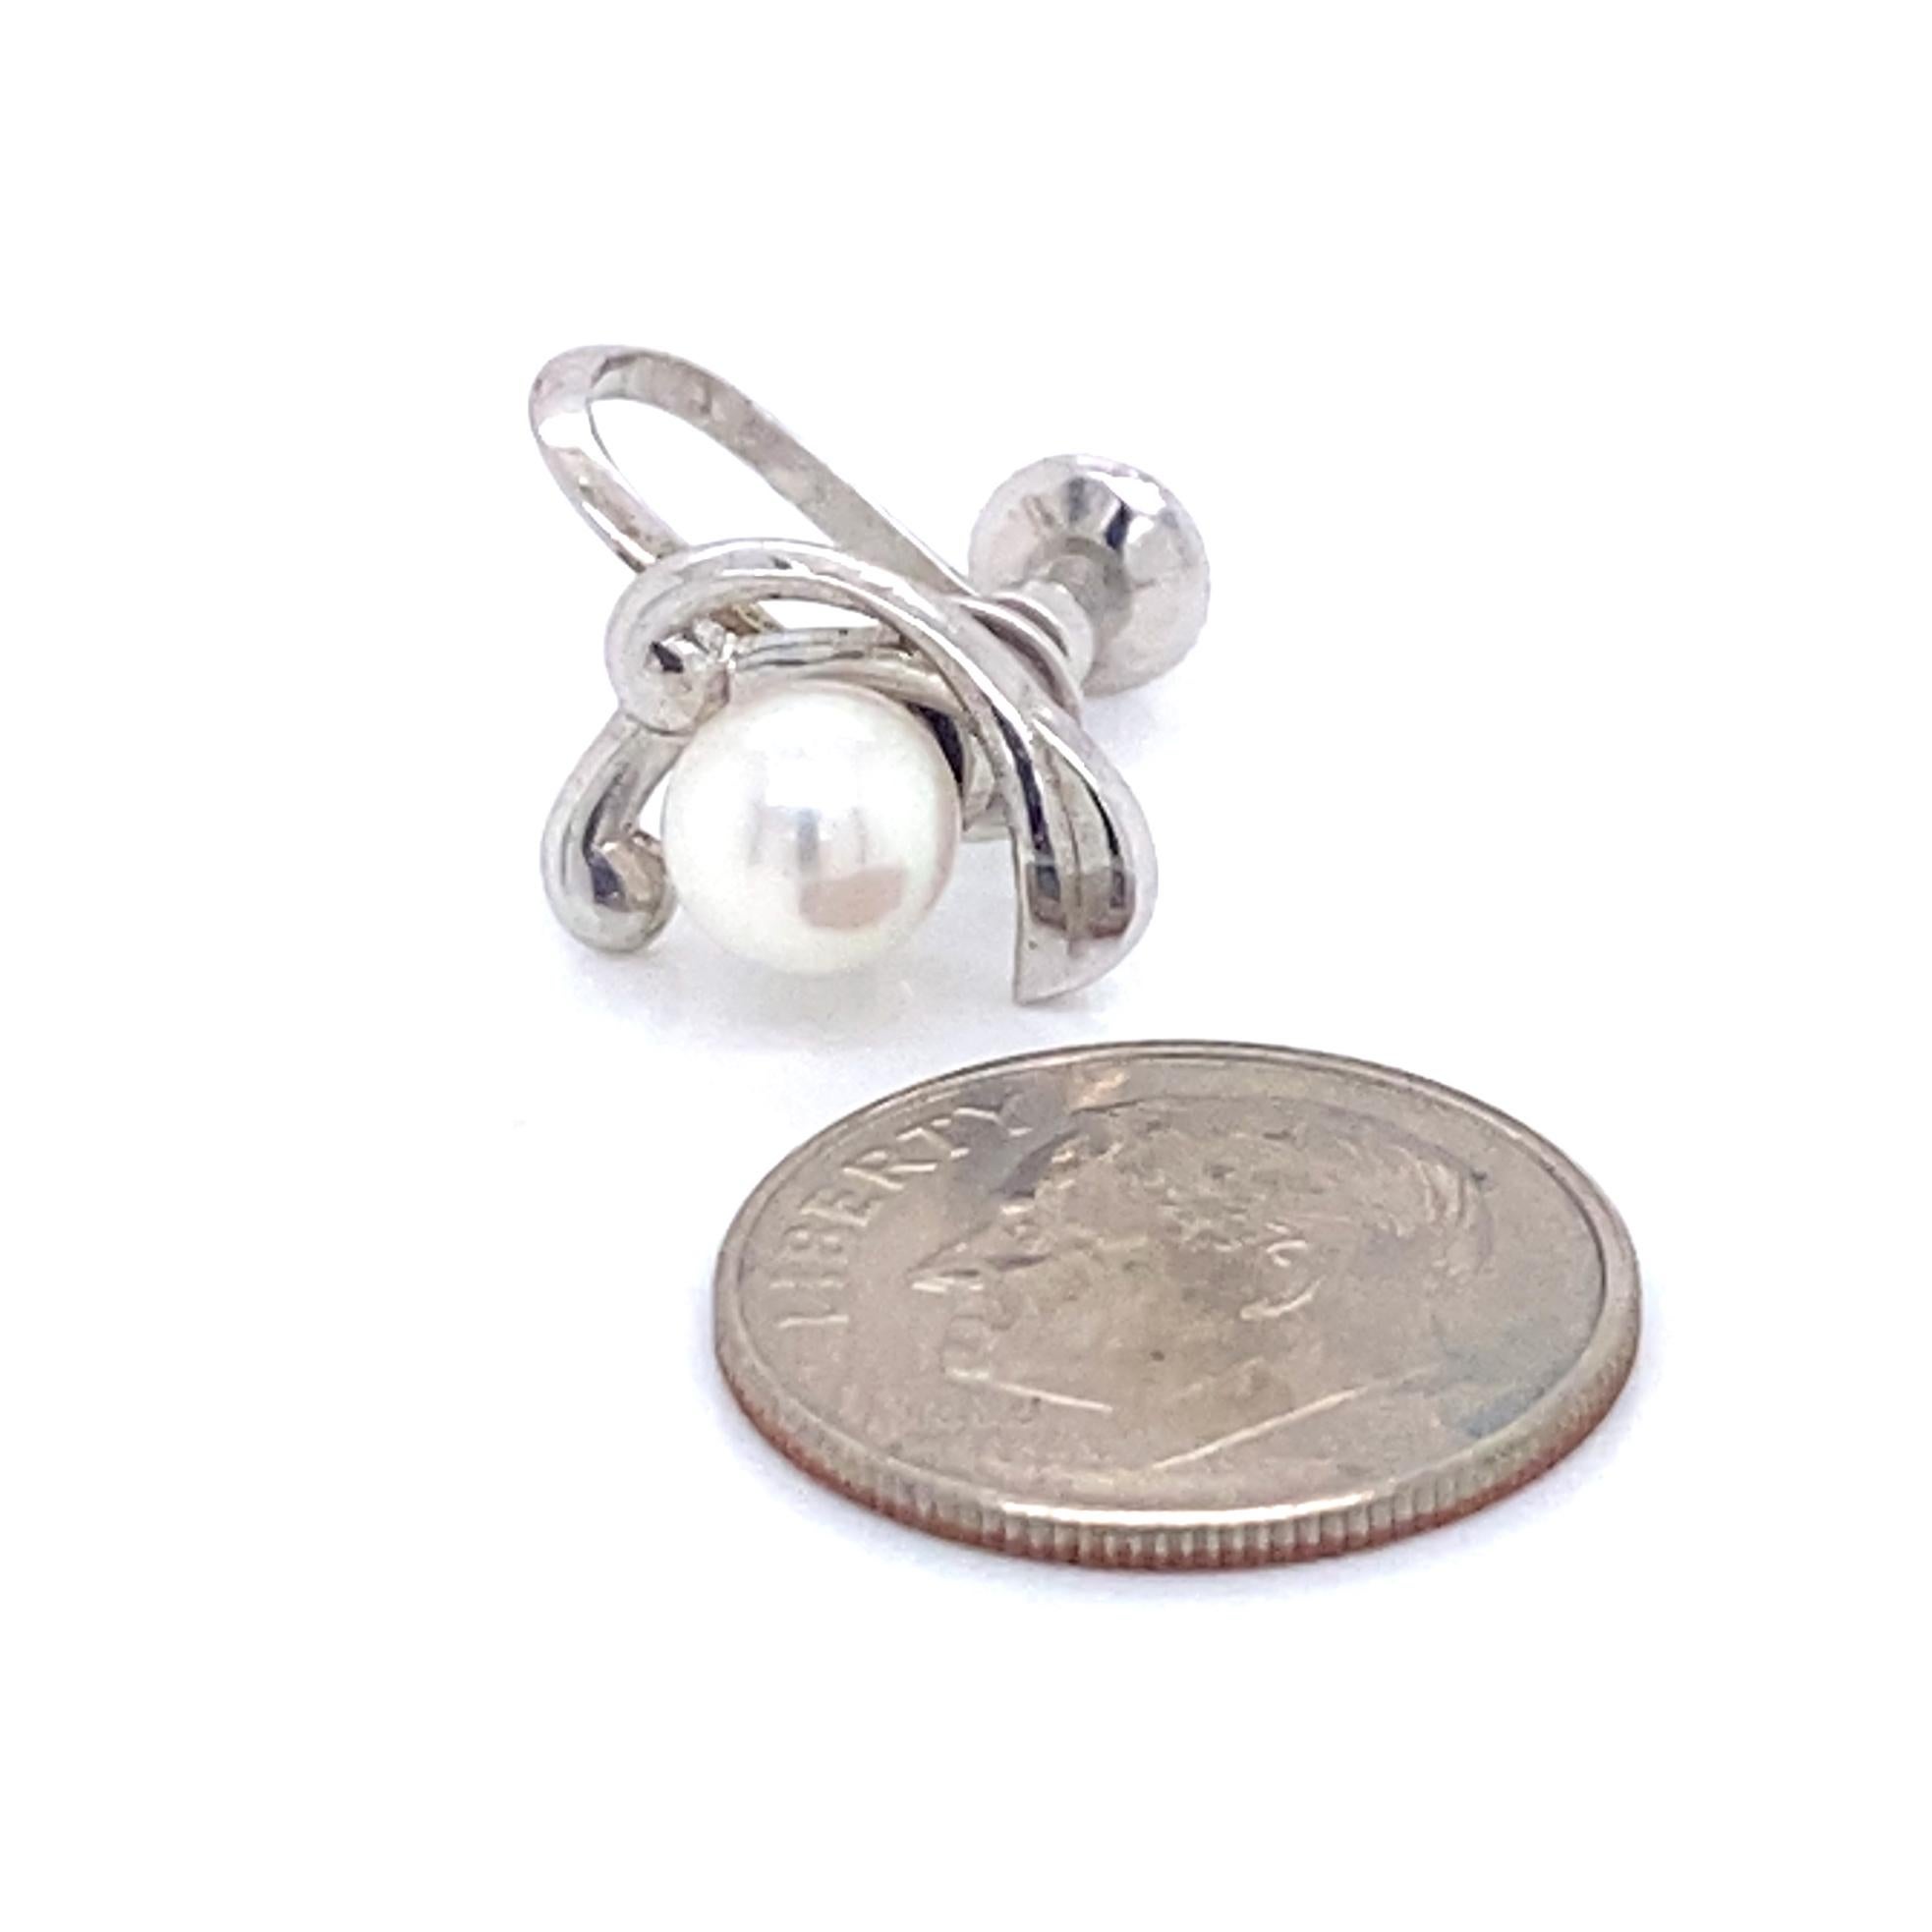 Mikimoto Estate Akoya Pearl Clip on Earrings Sterling Silver 3.53 Grams In Good Condition For Sale In Brooklyn, NY